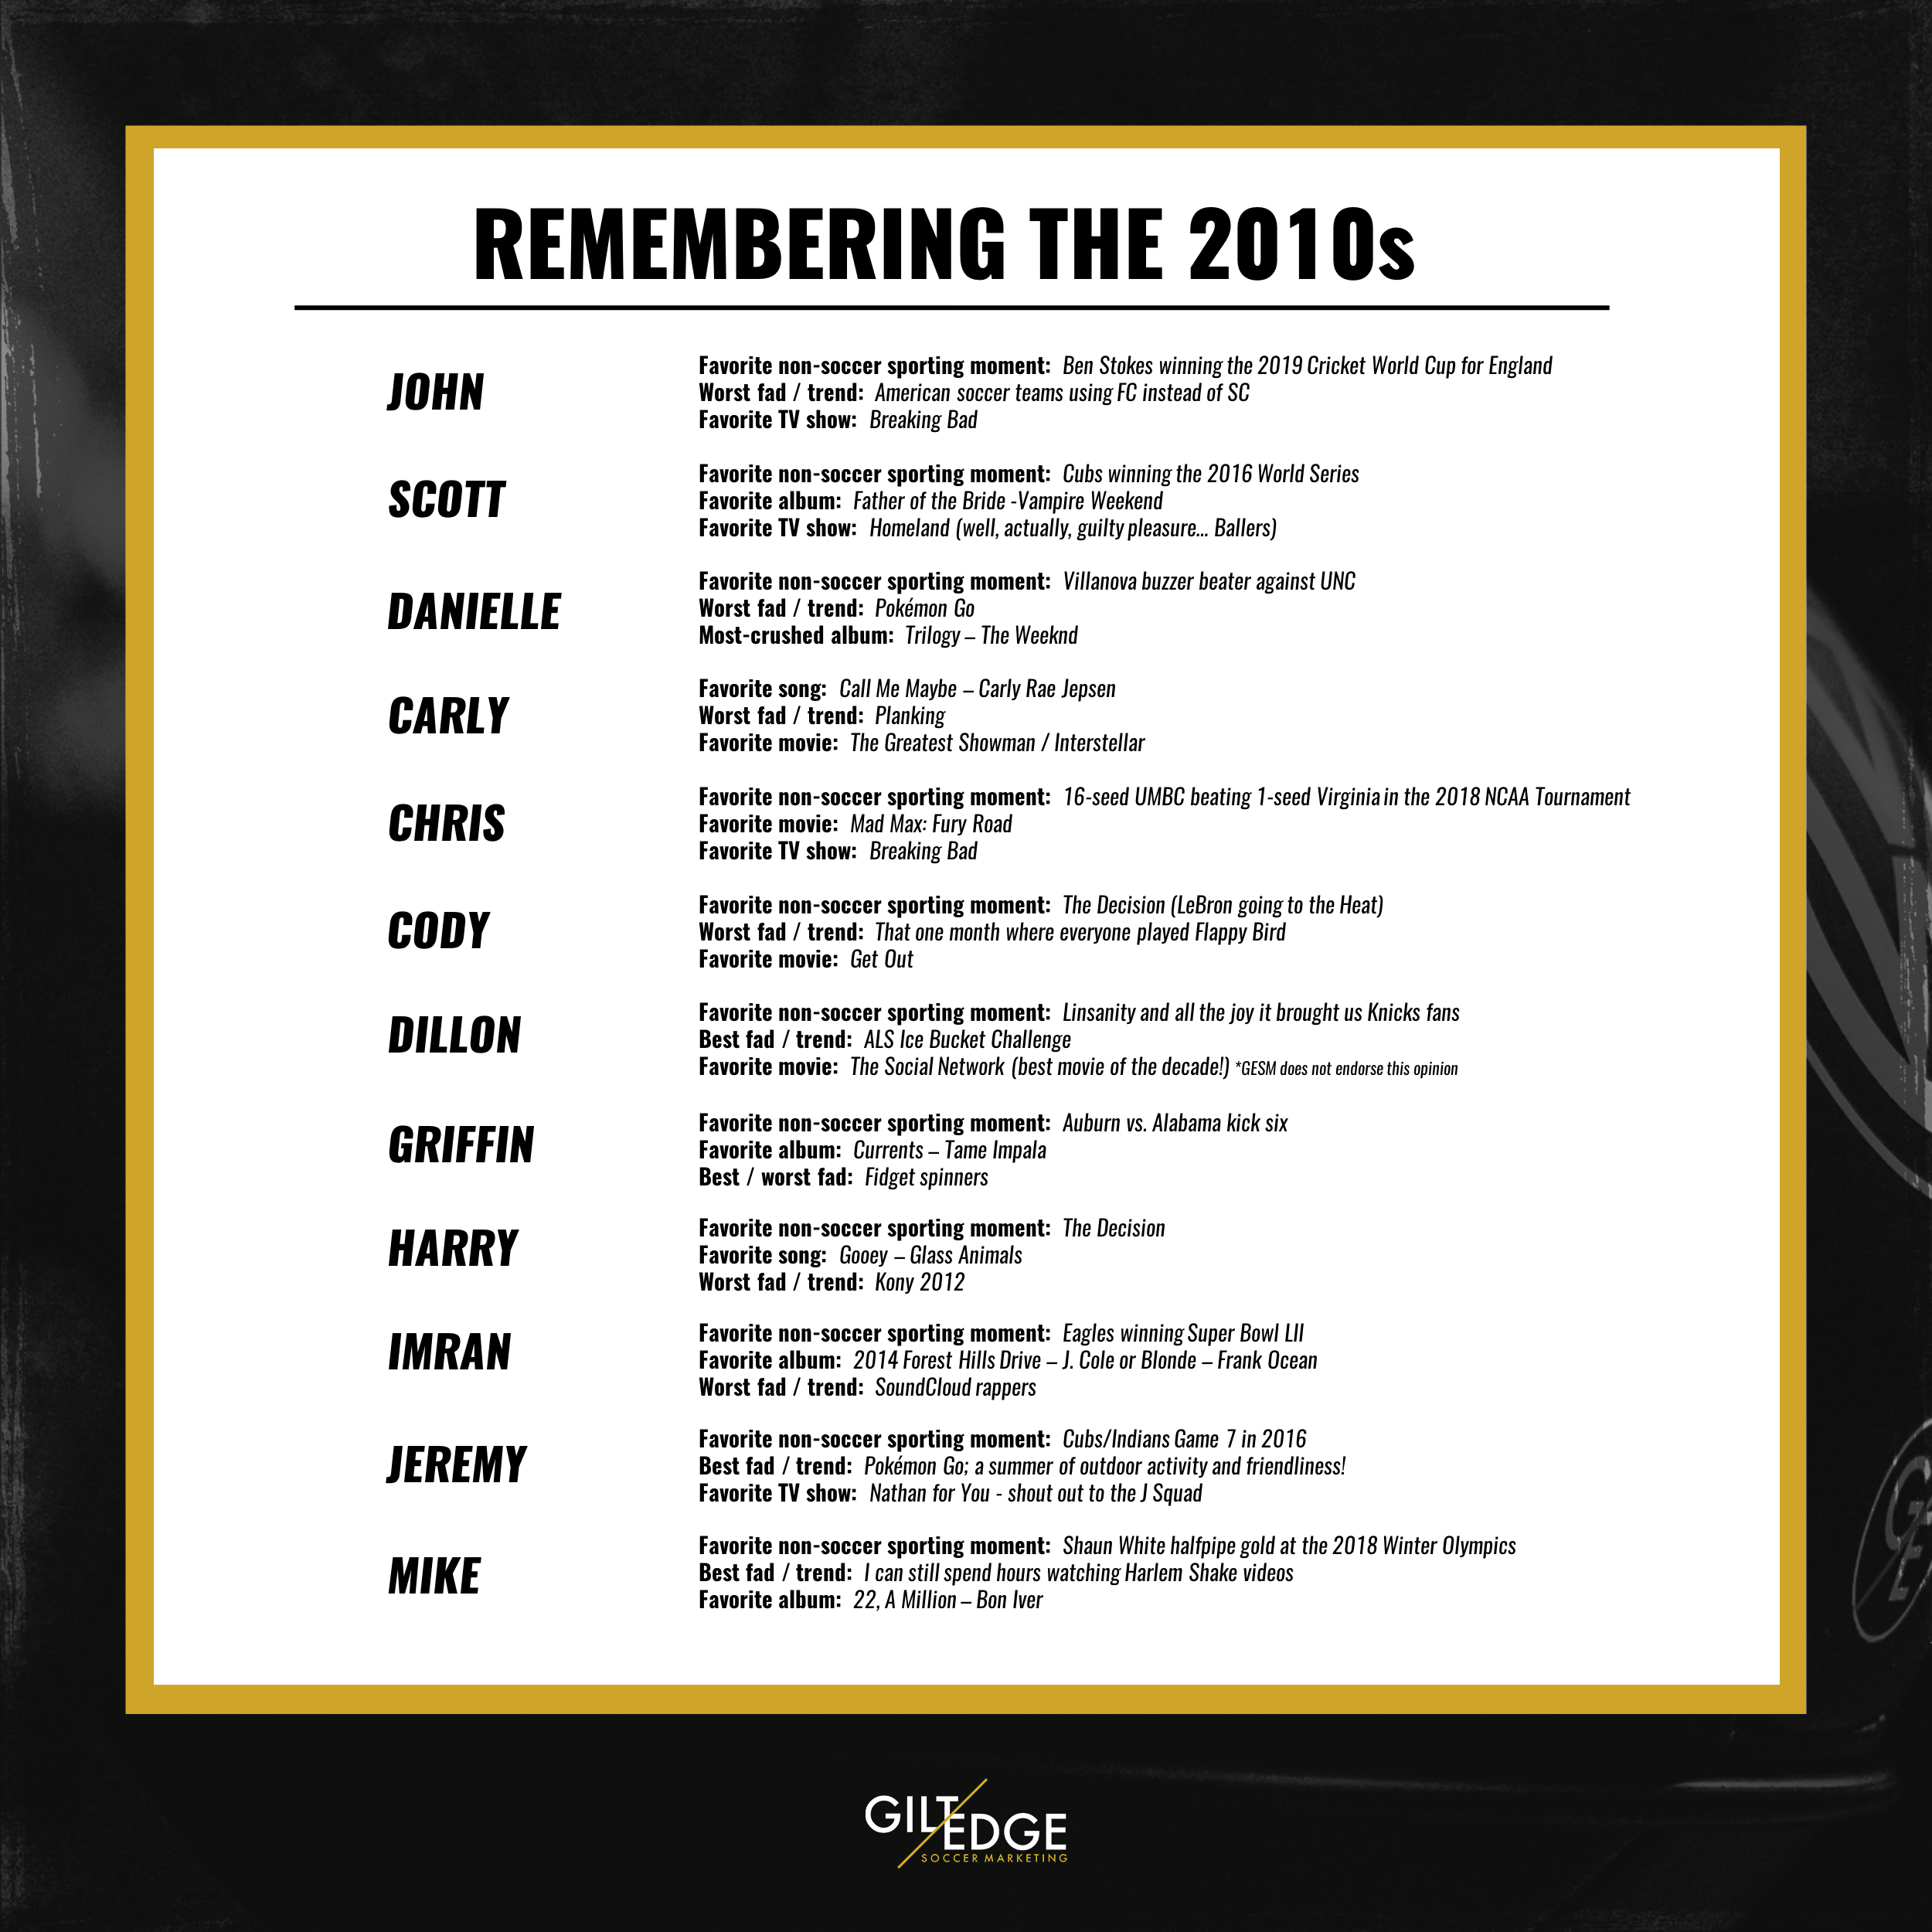 GESM - Remembering the 2010s